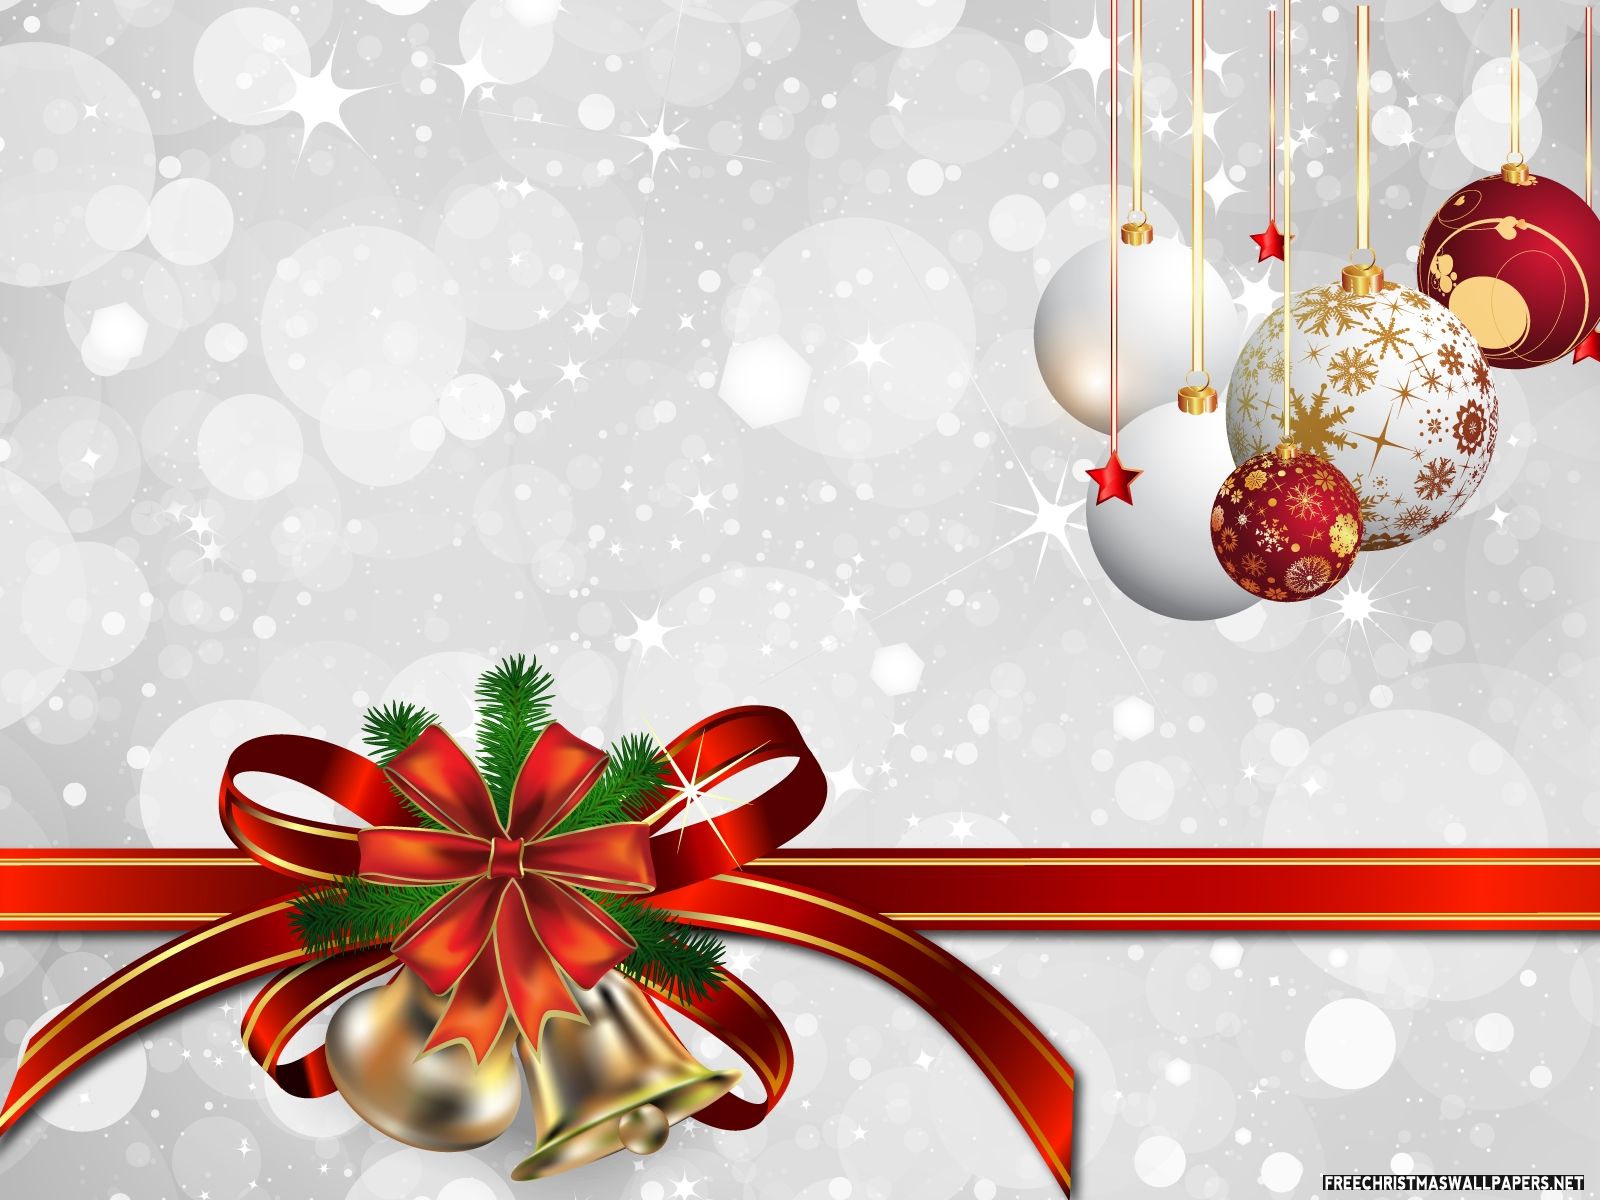 Free Christmas Wallpaper Pack 62: 46 Free Christmas Wallpaper Collection